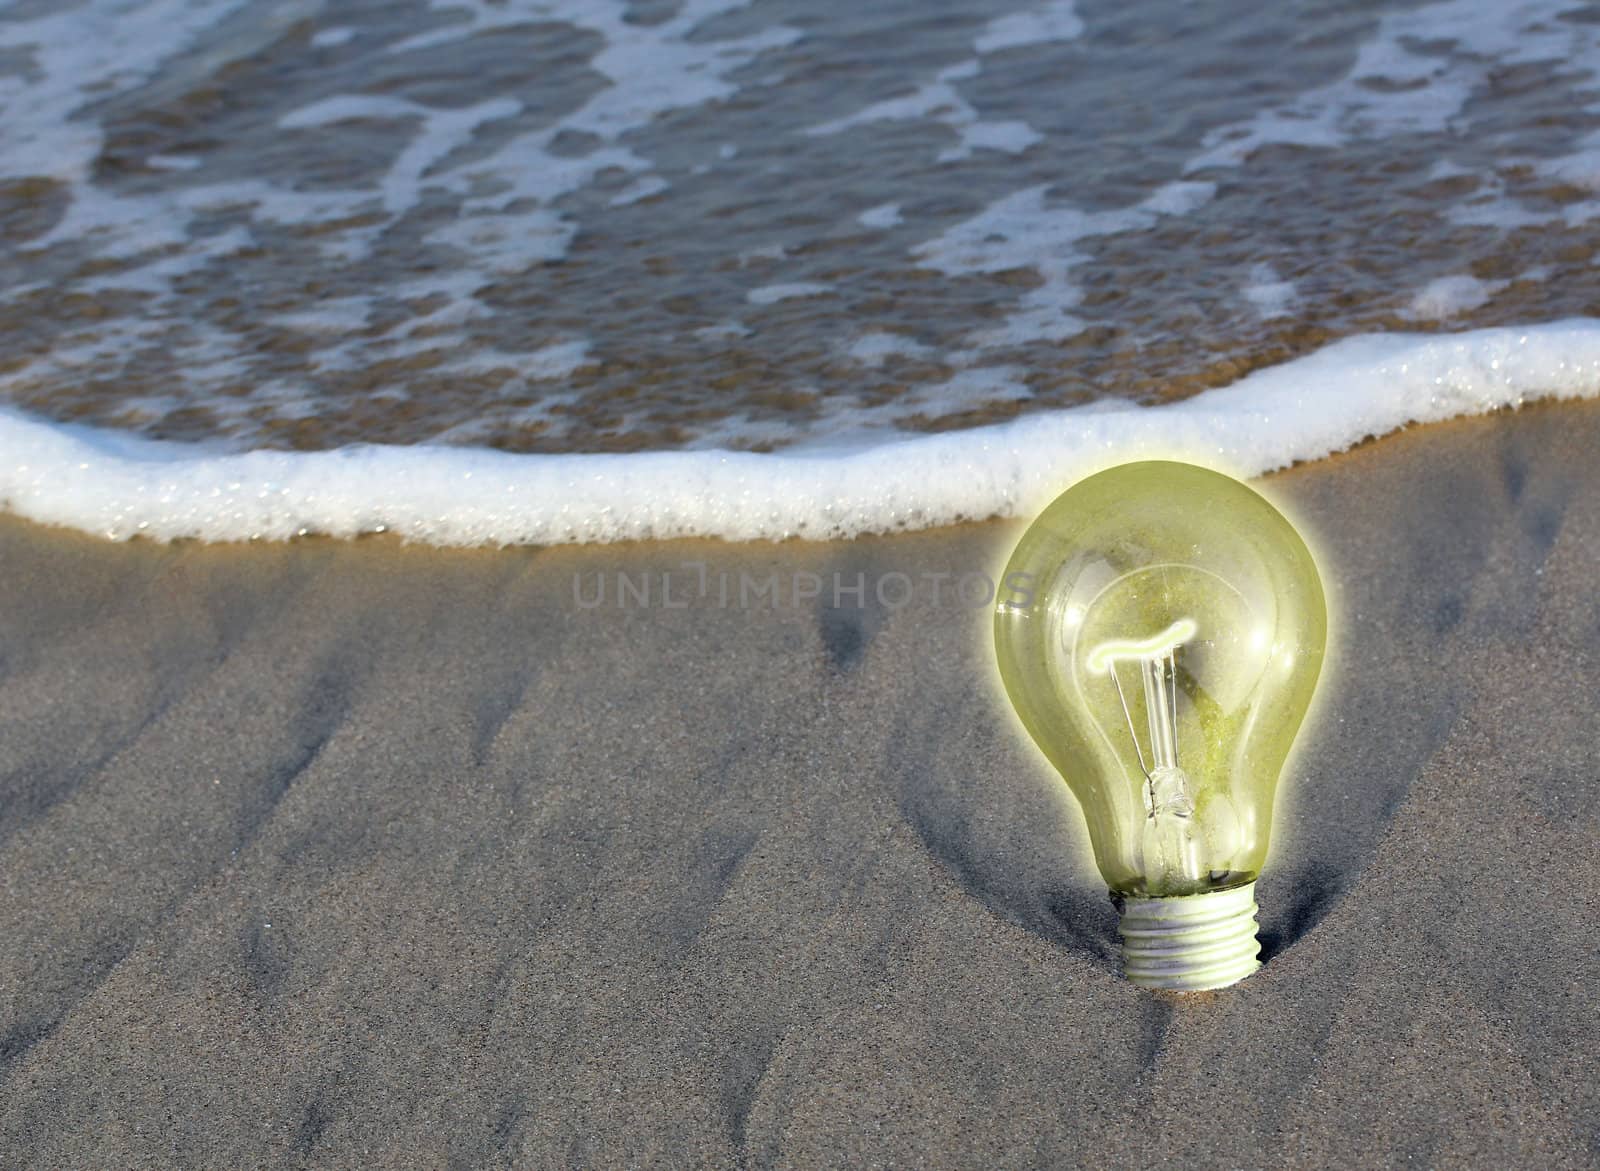 Glowing ight bulb on a beach, concept of determination, persistence, staying put and remaining steady.